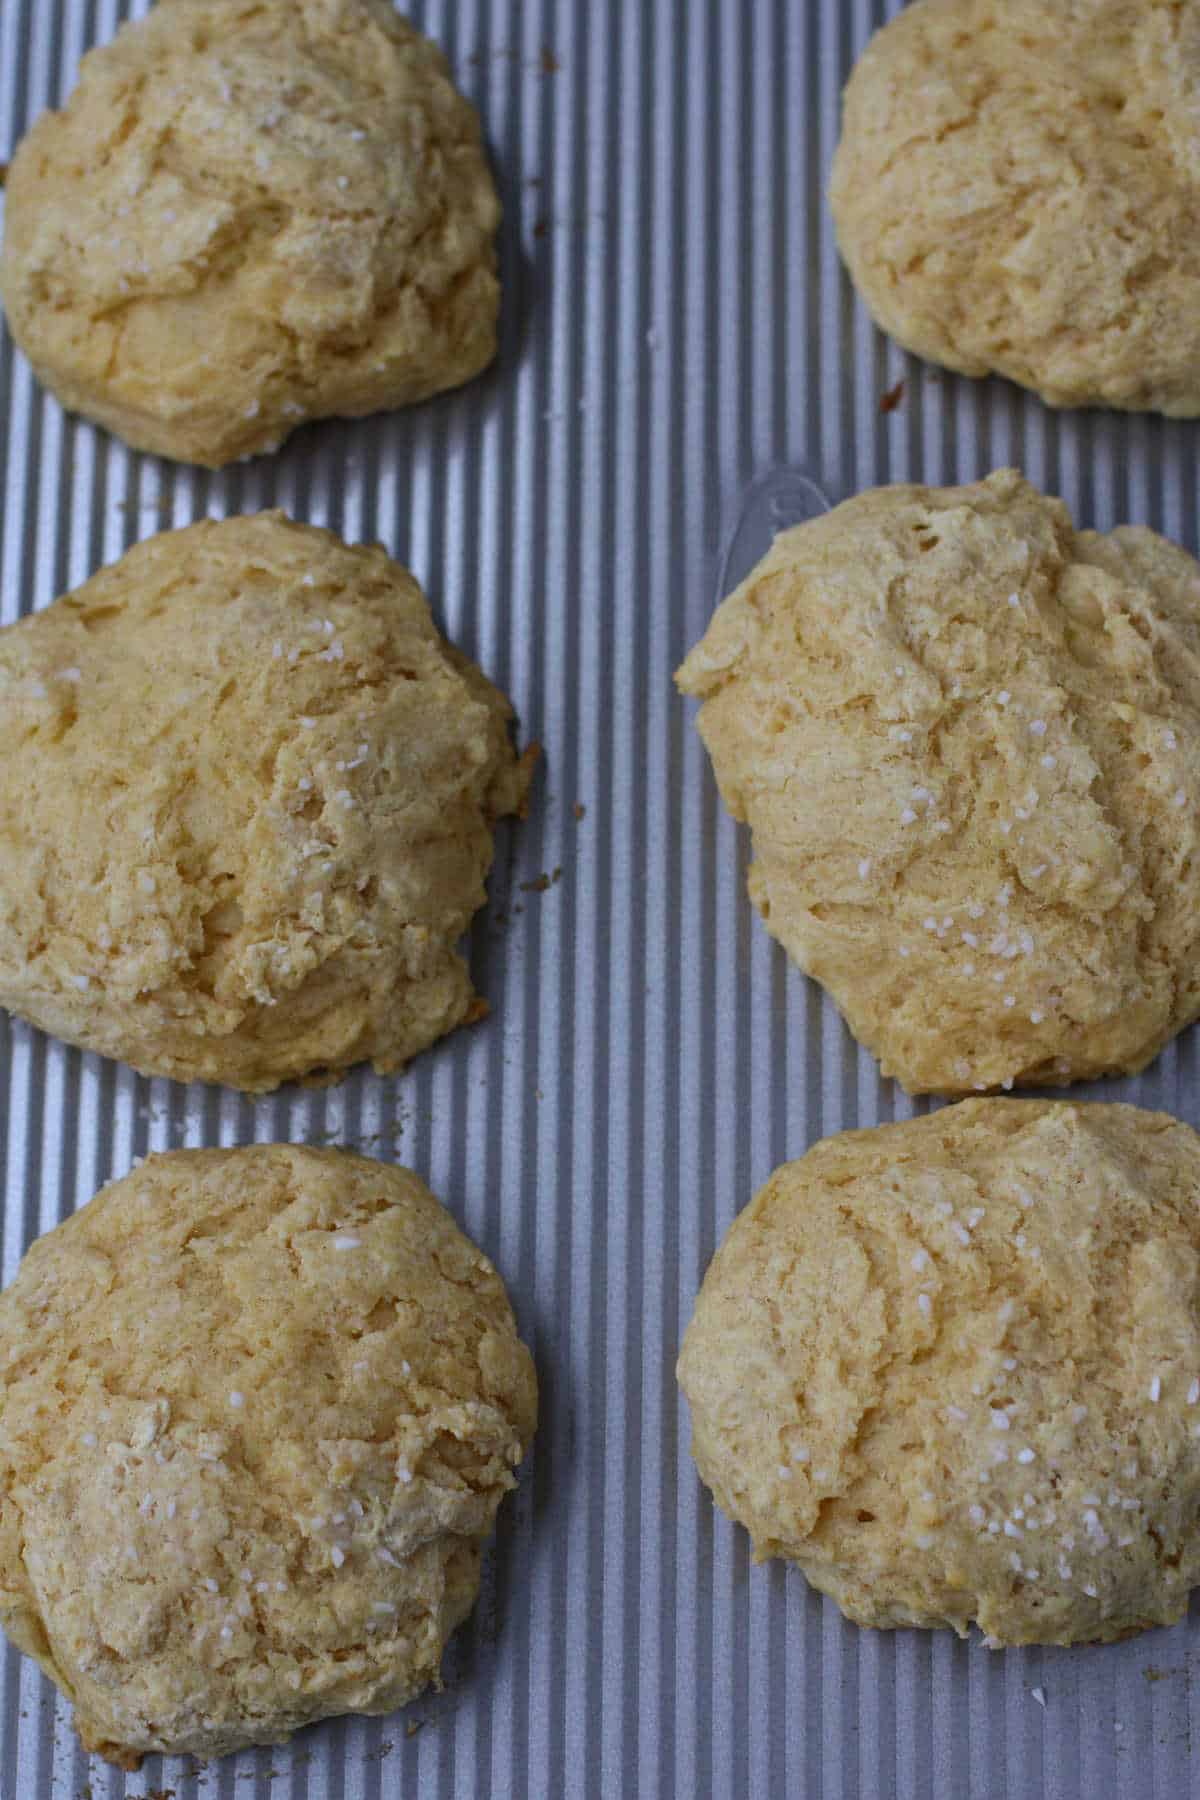 egg free biscuits after baking